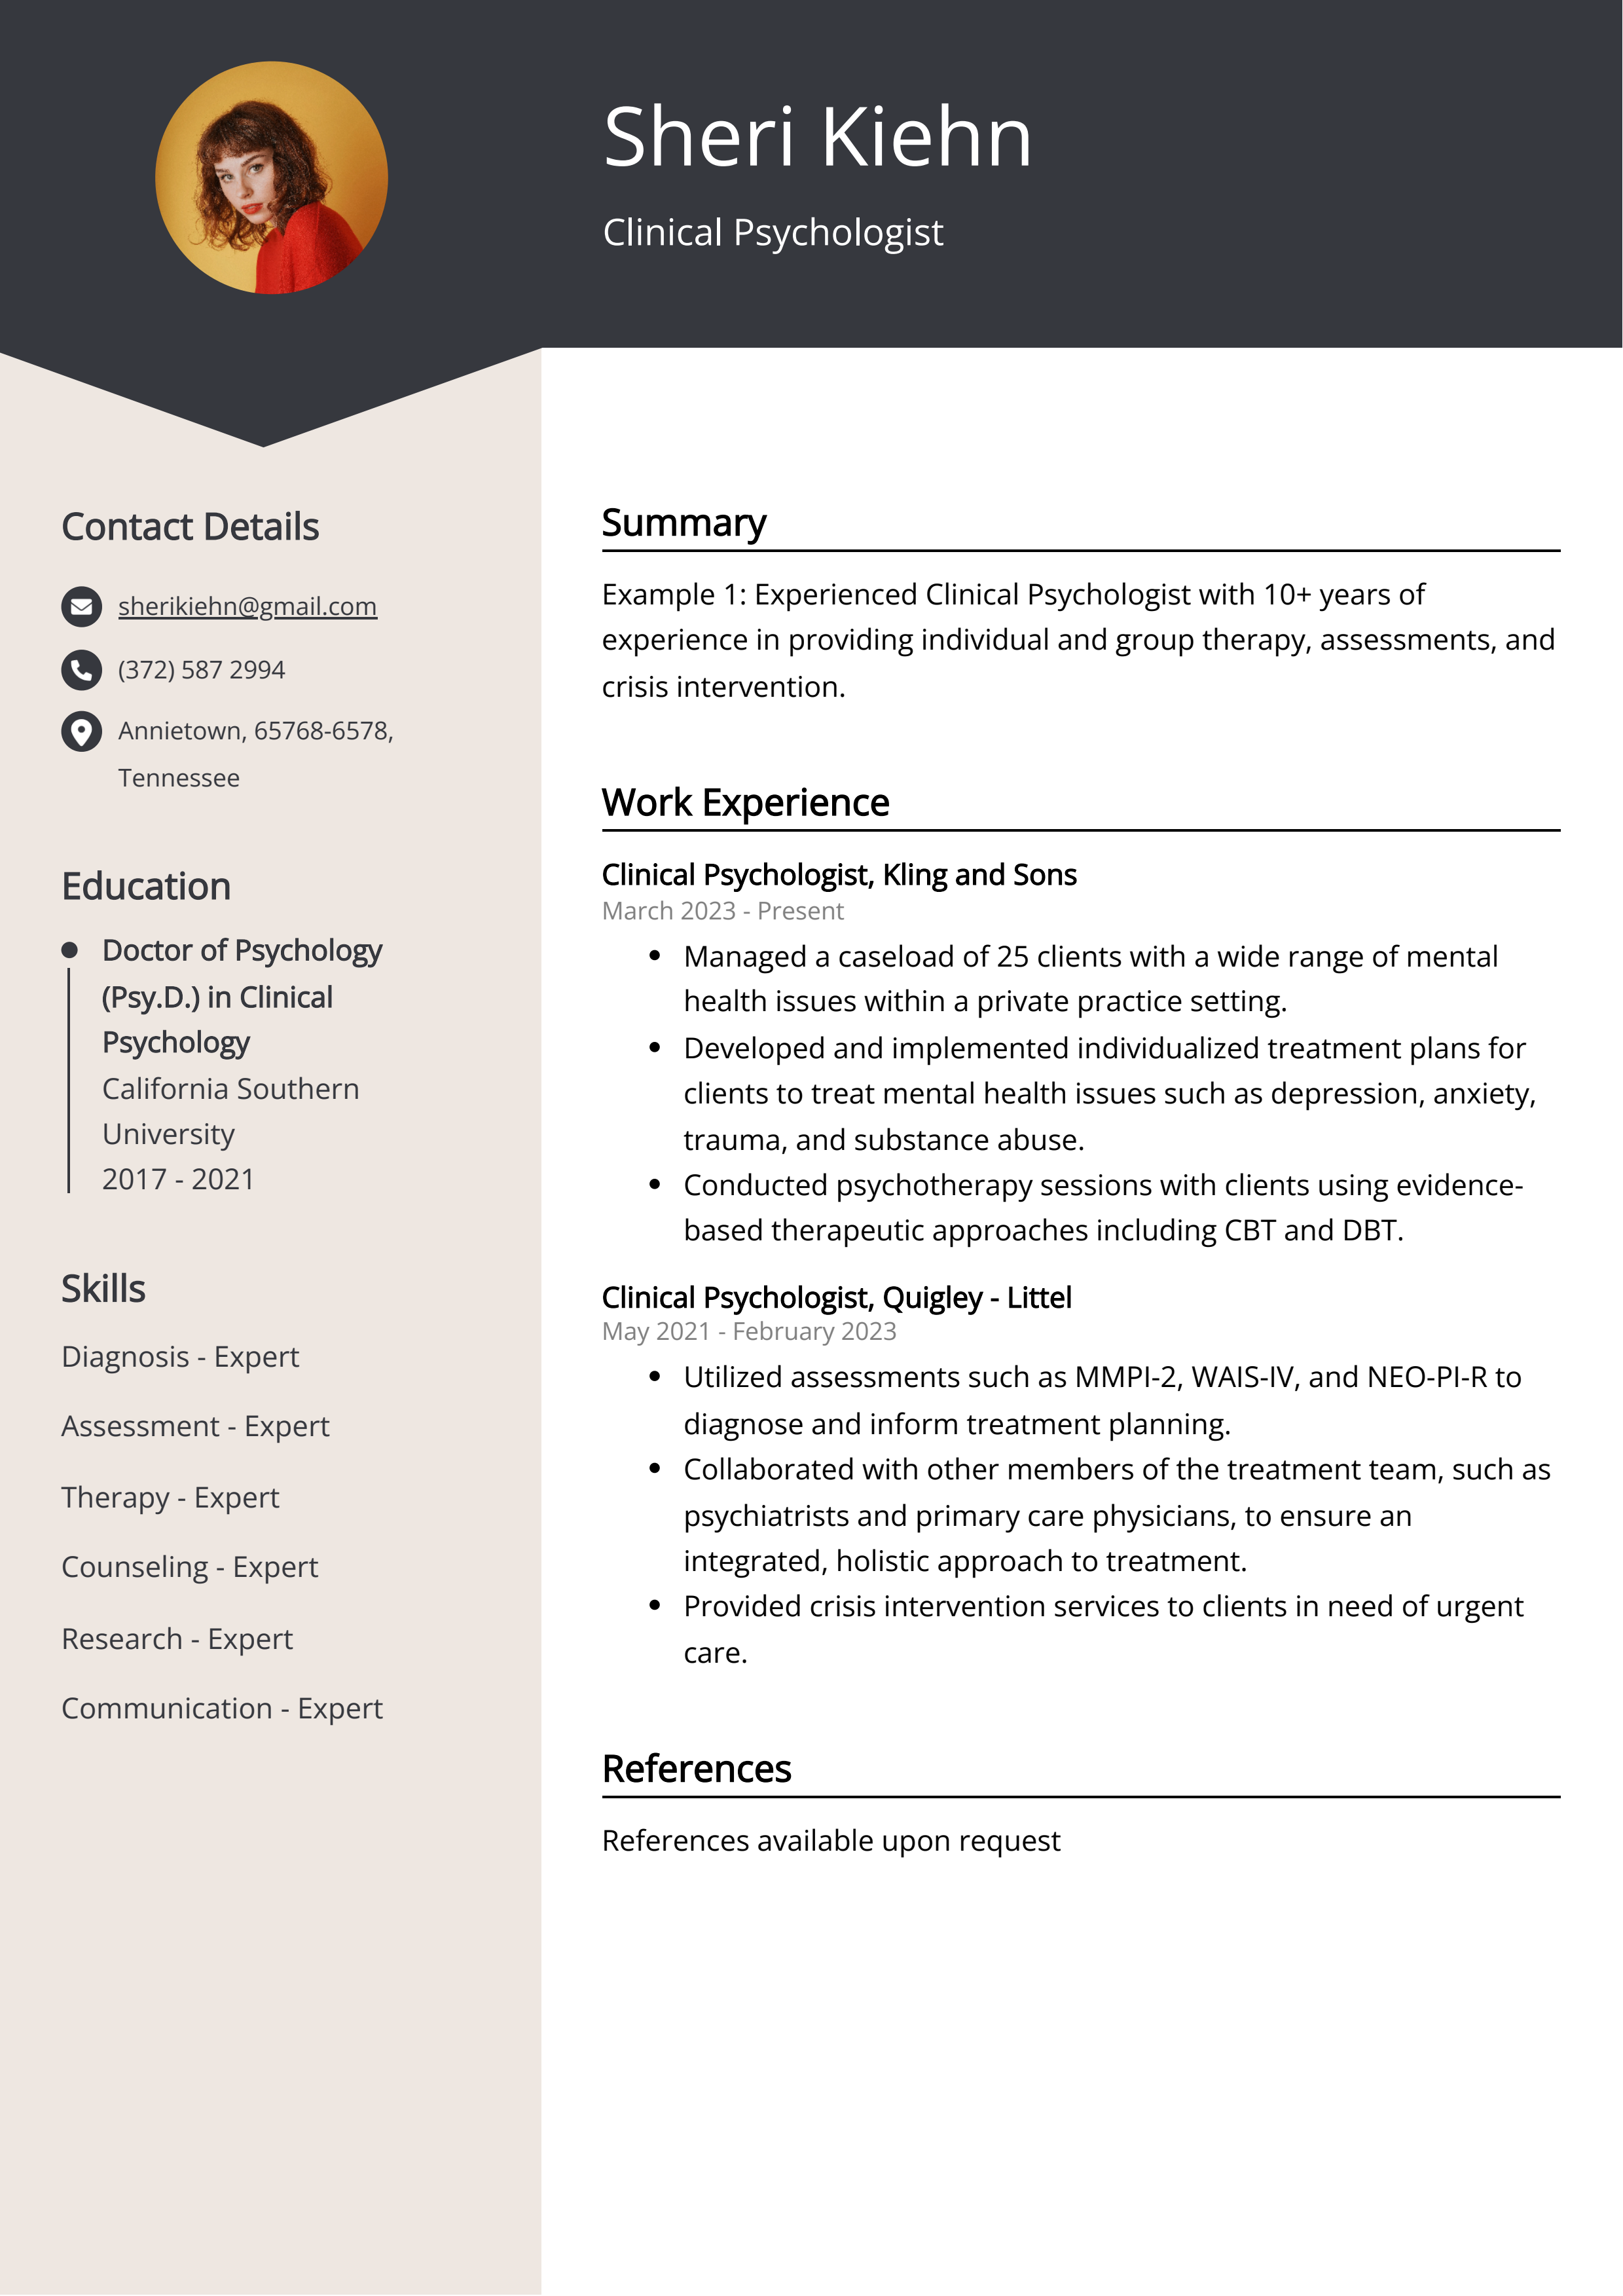 Clinical Psychologist CV Example